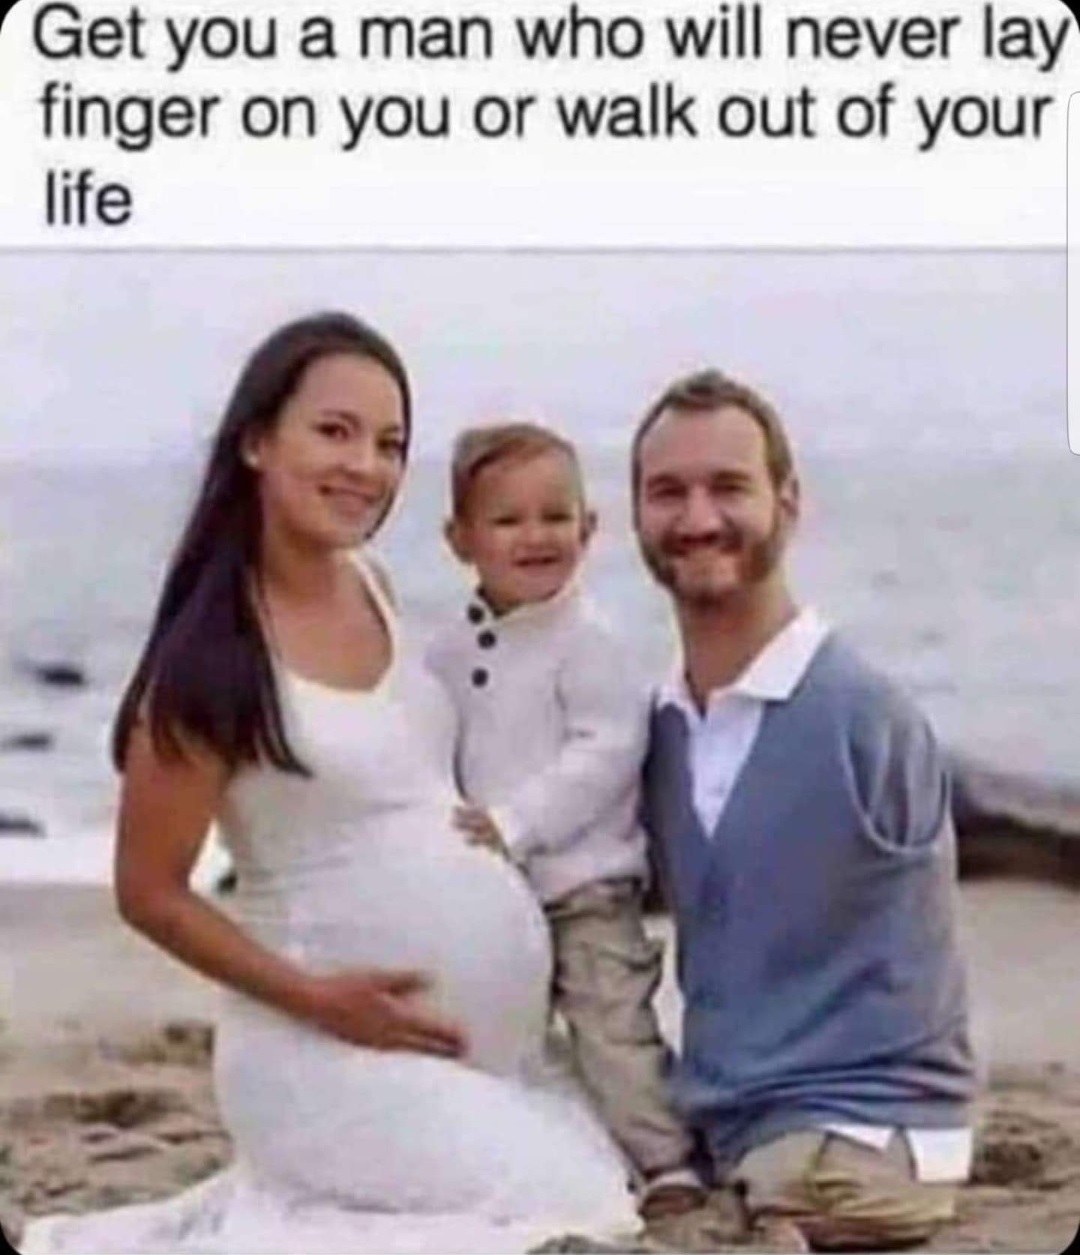 nick vujicic meme - Get you a man who will never lay finger on you or walk out of your life